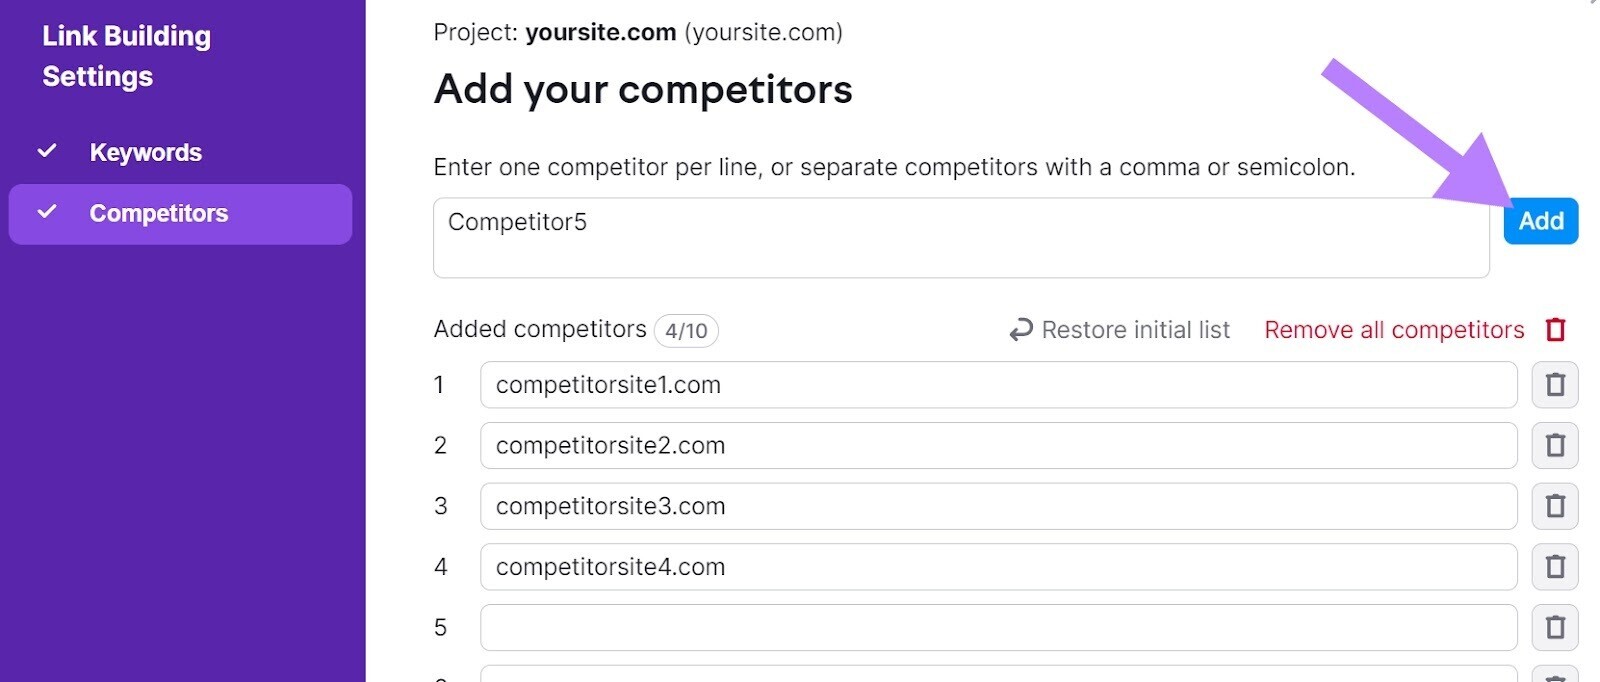 "Add your competitors" page